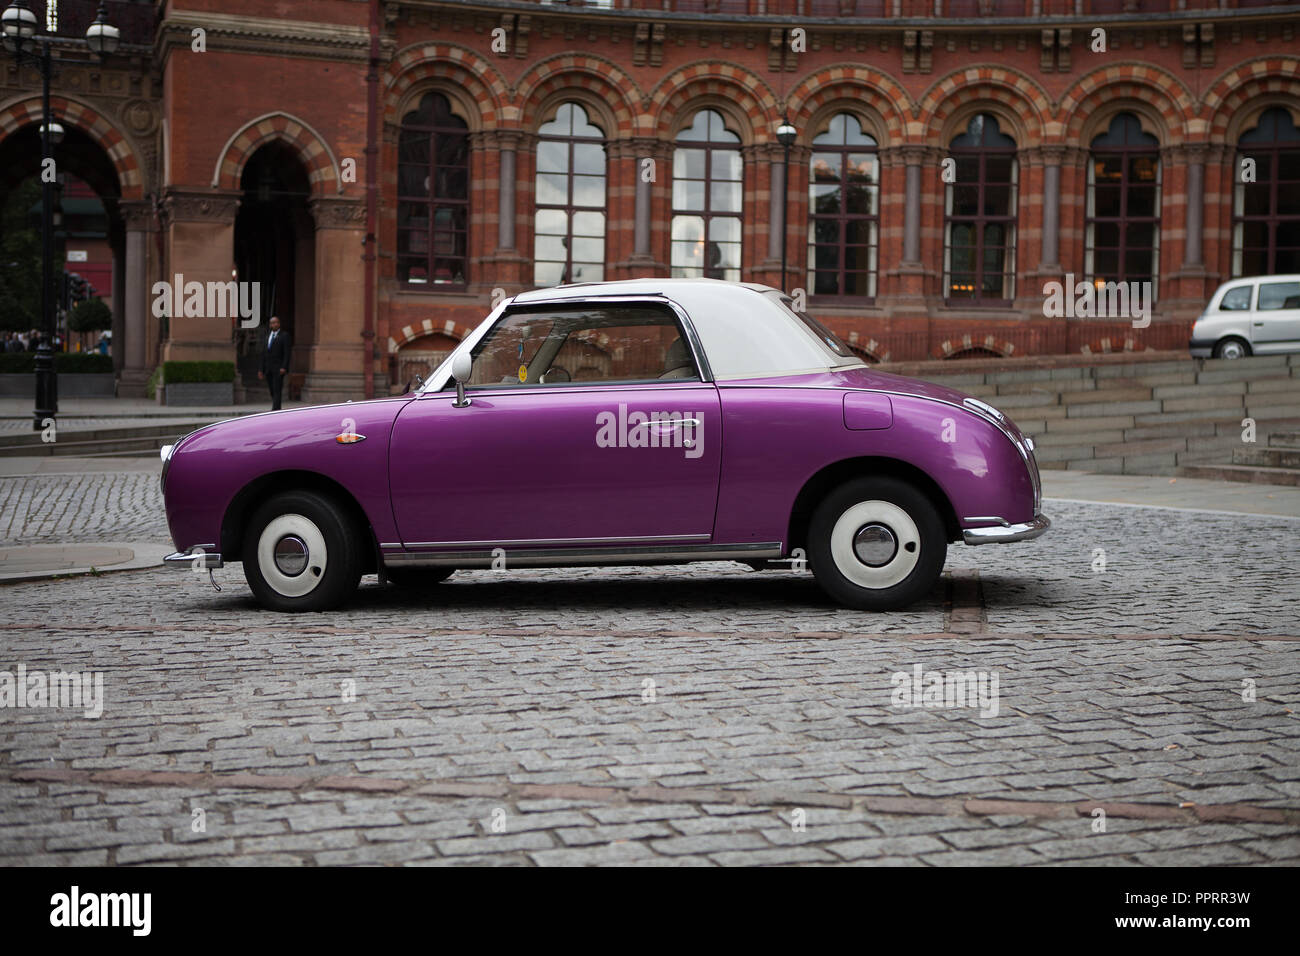 Nissan Figaro parked in front of the Midland Grand Hotel, St. Pancras, London, UK. Stock Photo